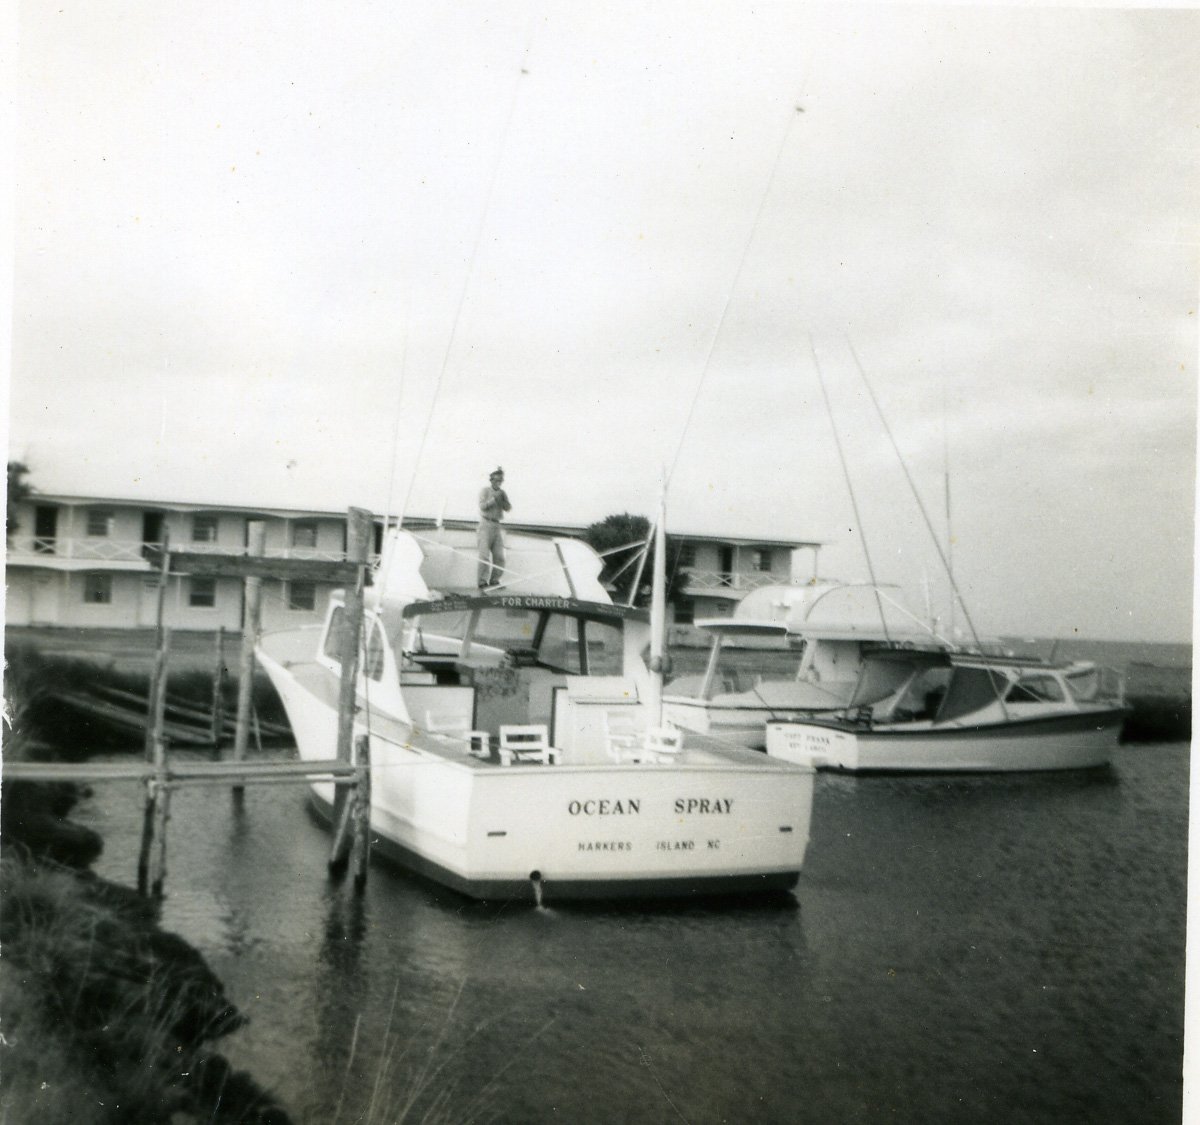 Capt Benny Rose aboard his charter boat, the Ocean Spray, in front of the Carl Lewis Motel, late 1950s.